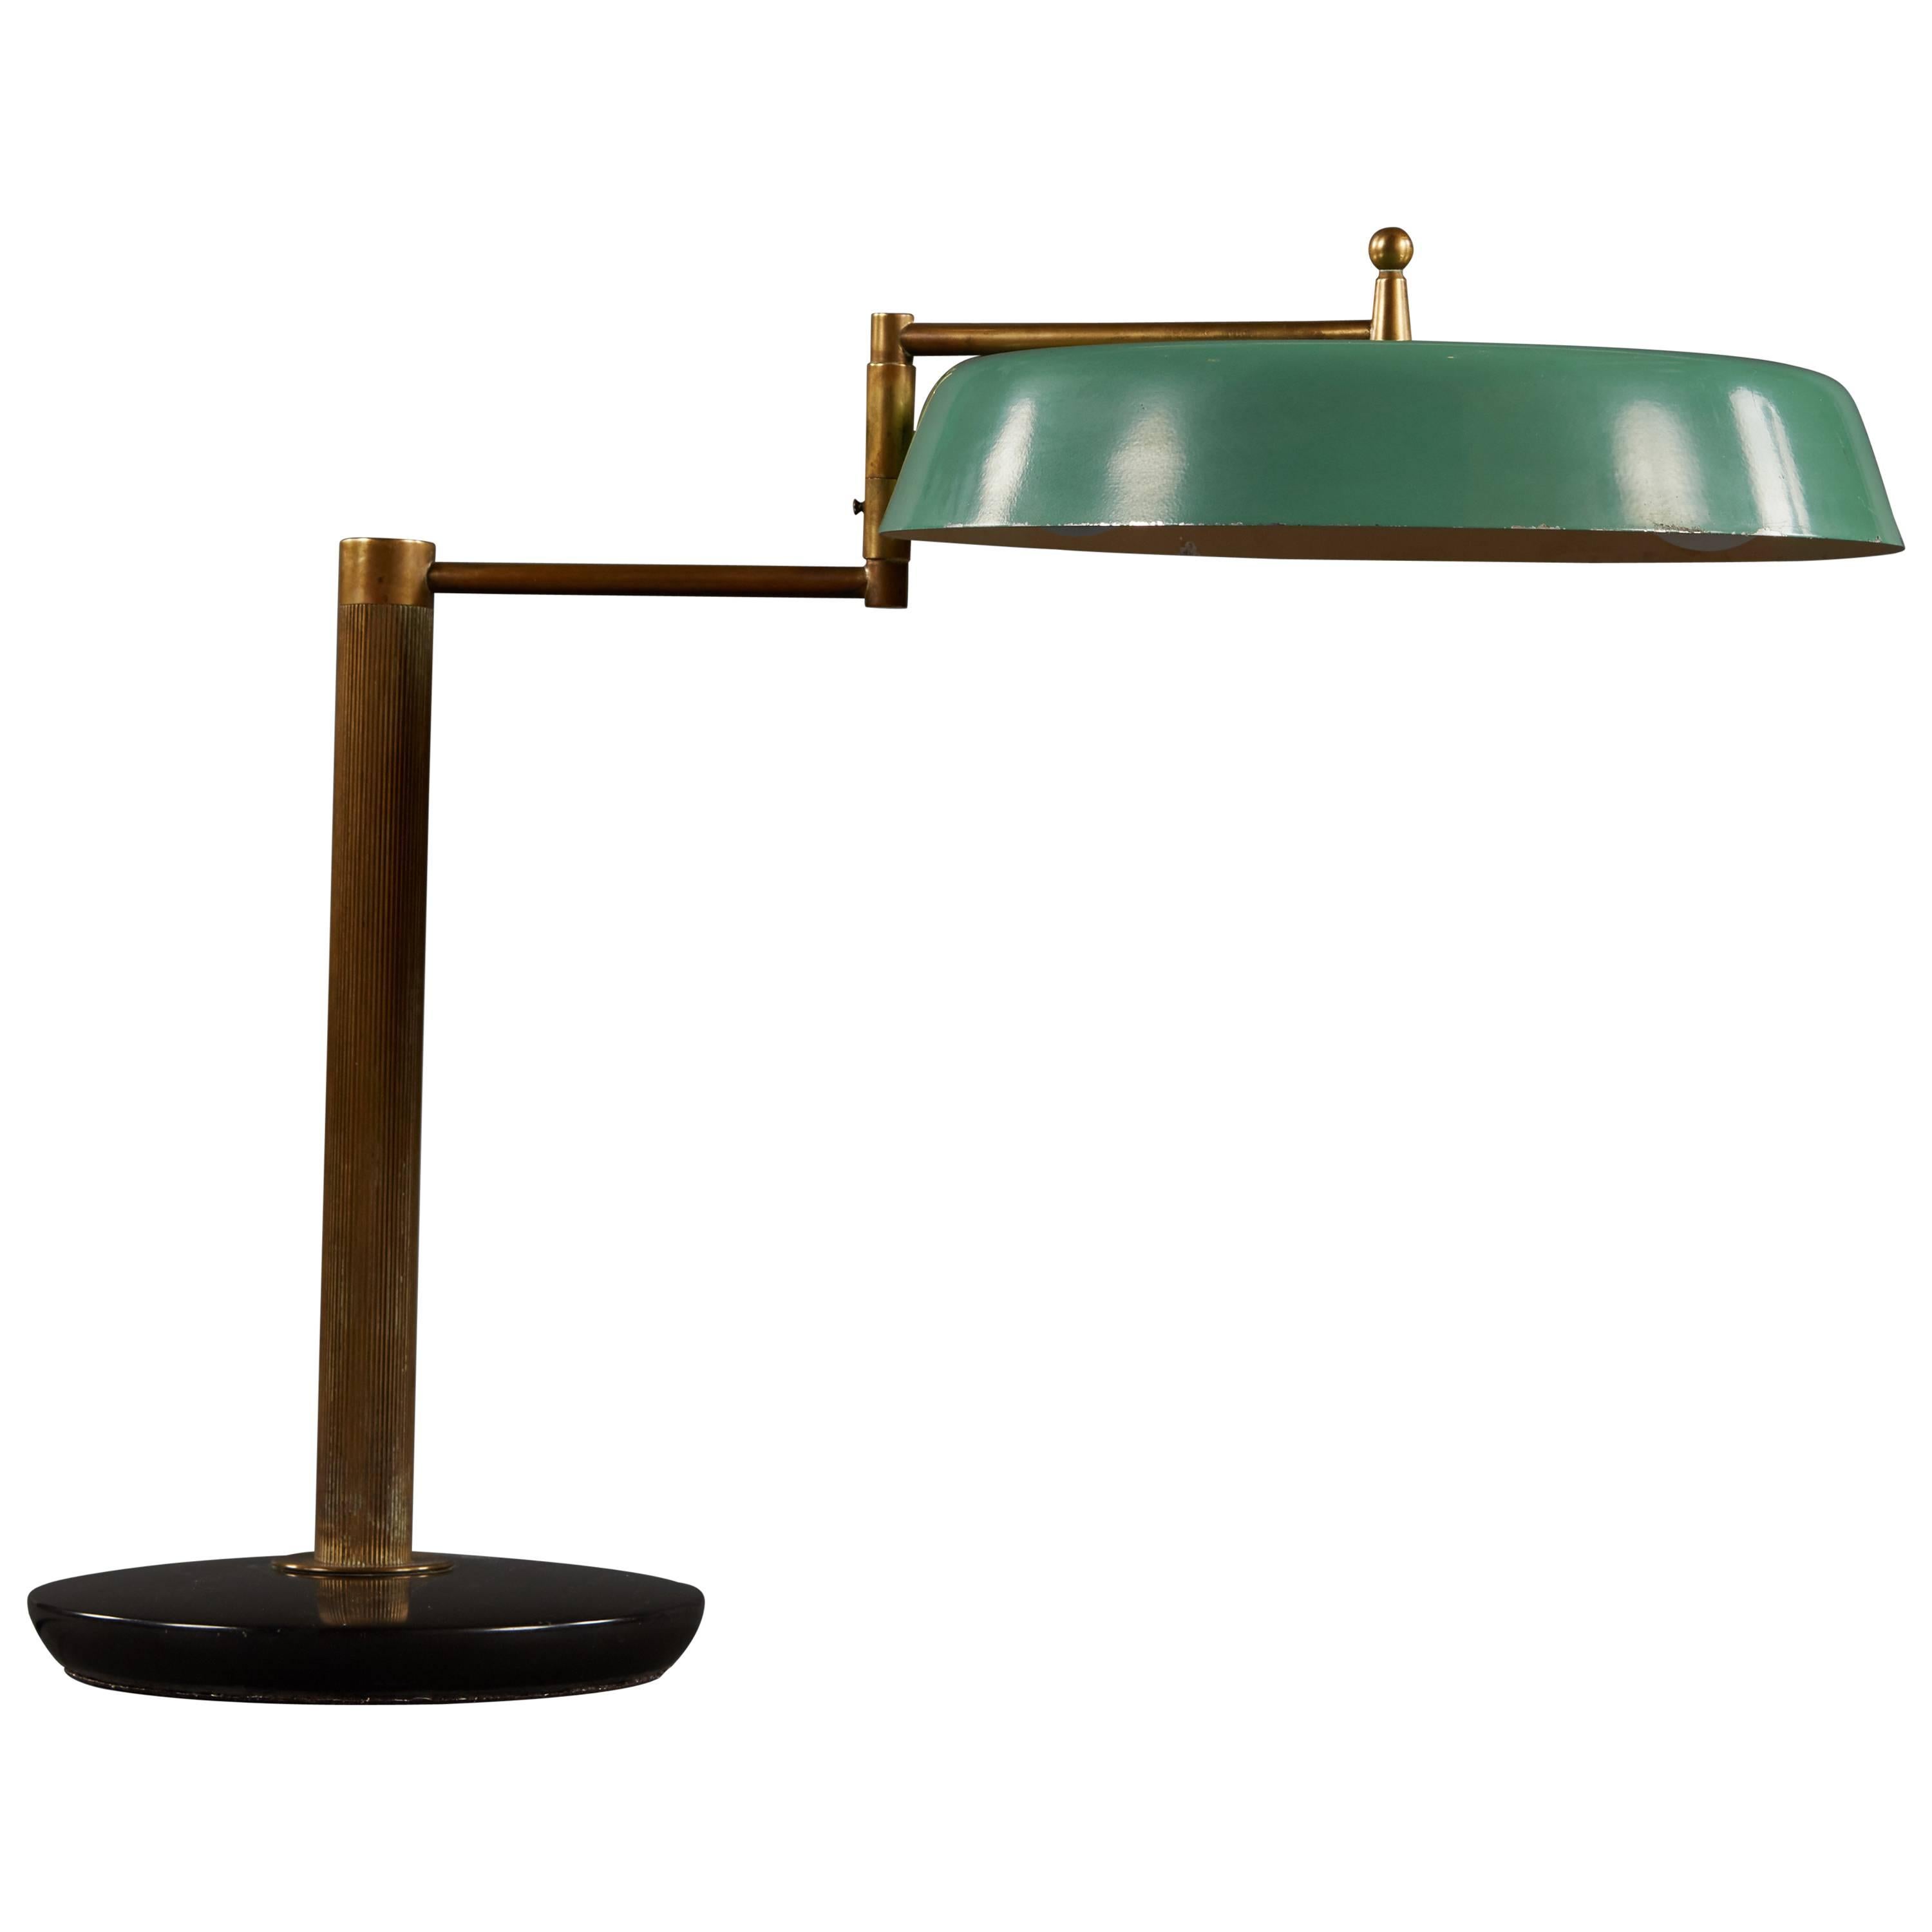 Articulating Italian Table Lamp with Green Enameled Shade